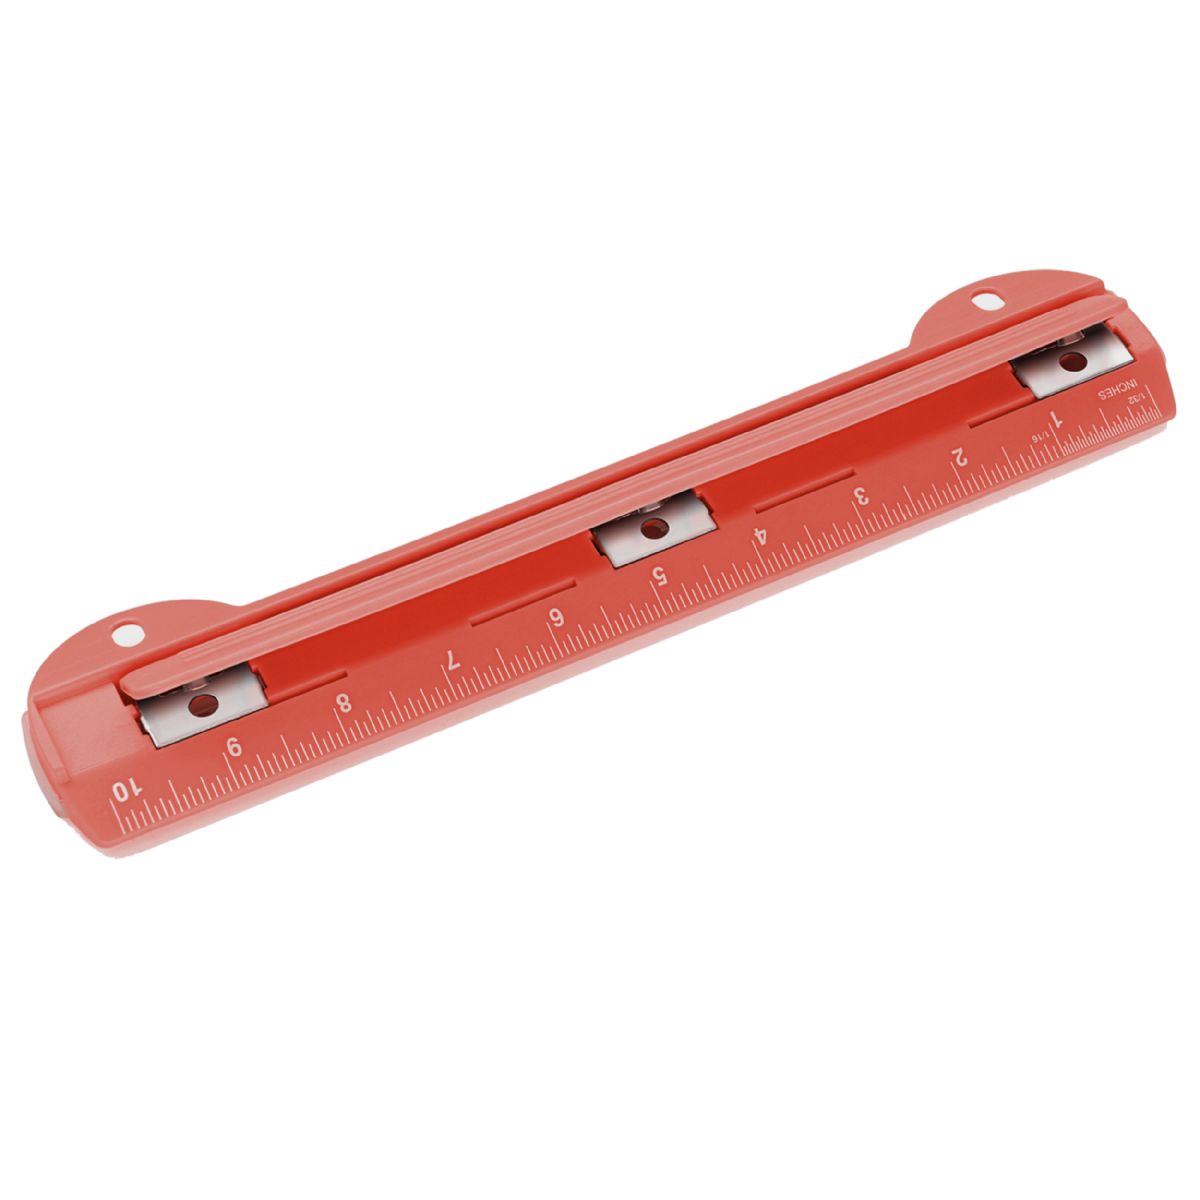 12 Pieces of Portable 3-Hole Paper Punch, Red